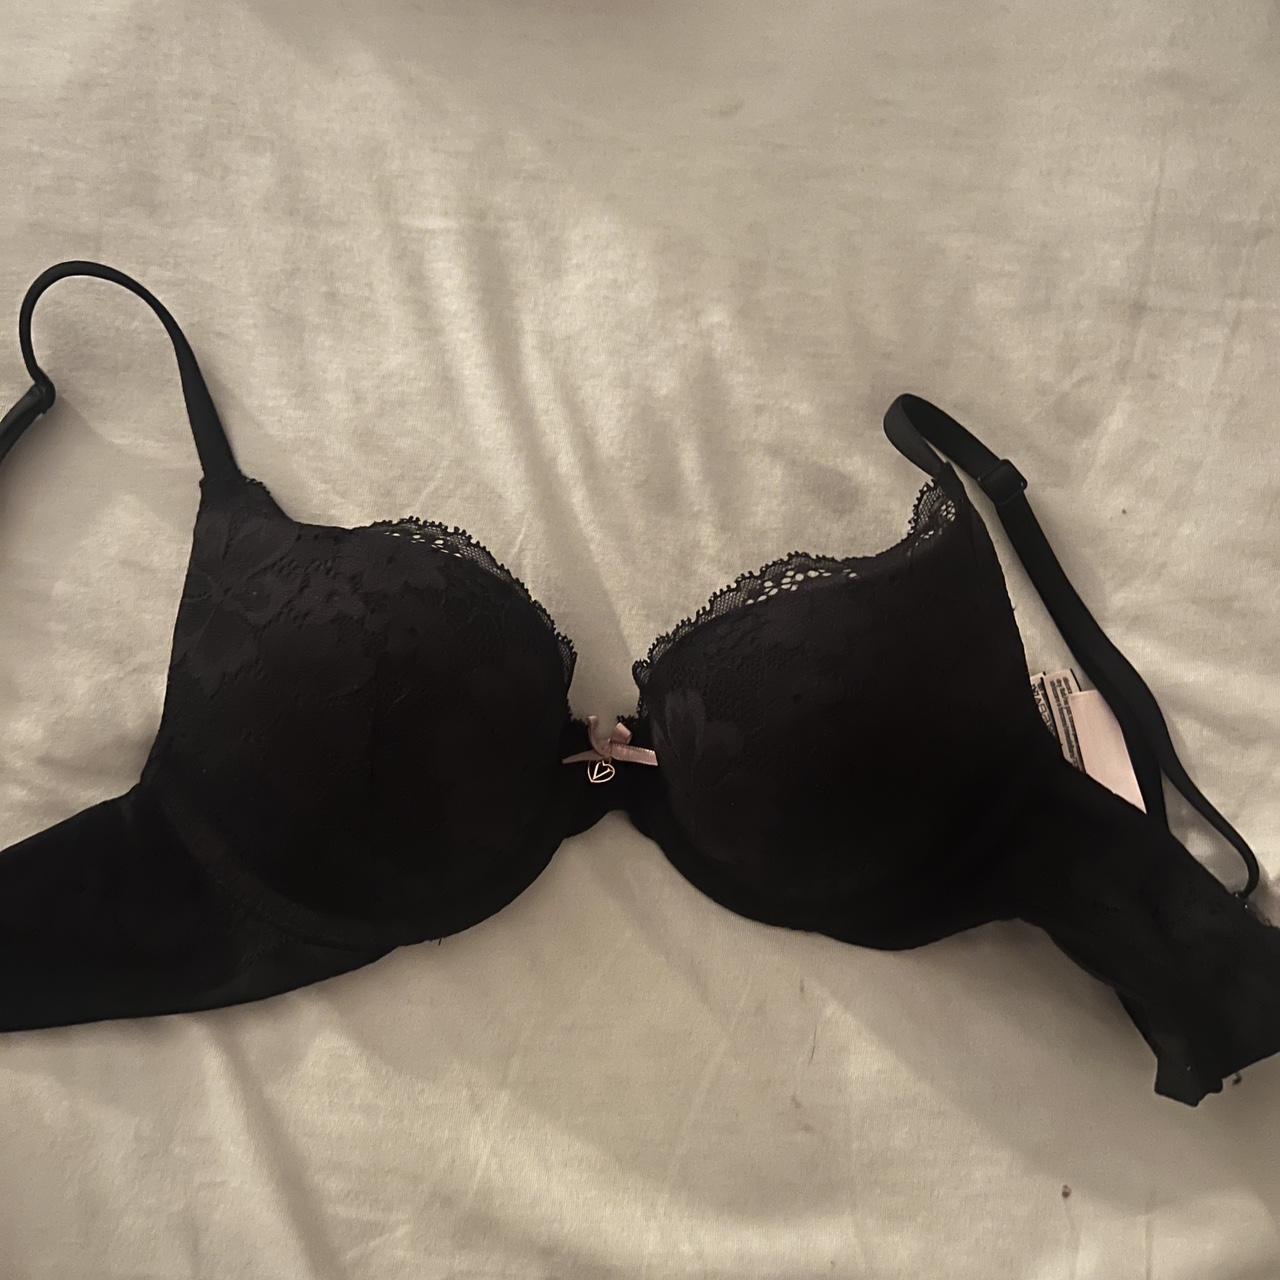 Knix Evolution Bra size 1 (recommended for 32A, 32B, - Depop